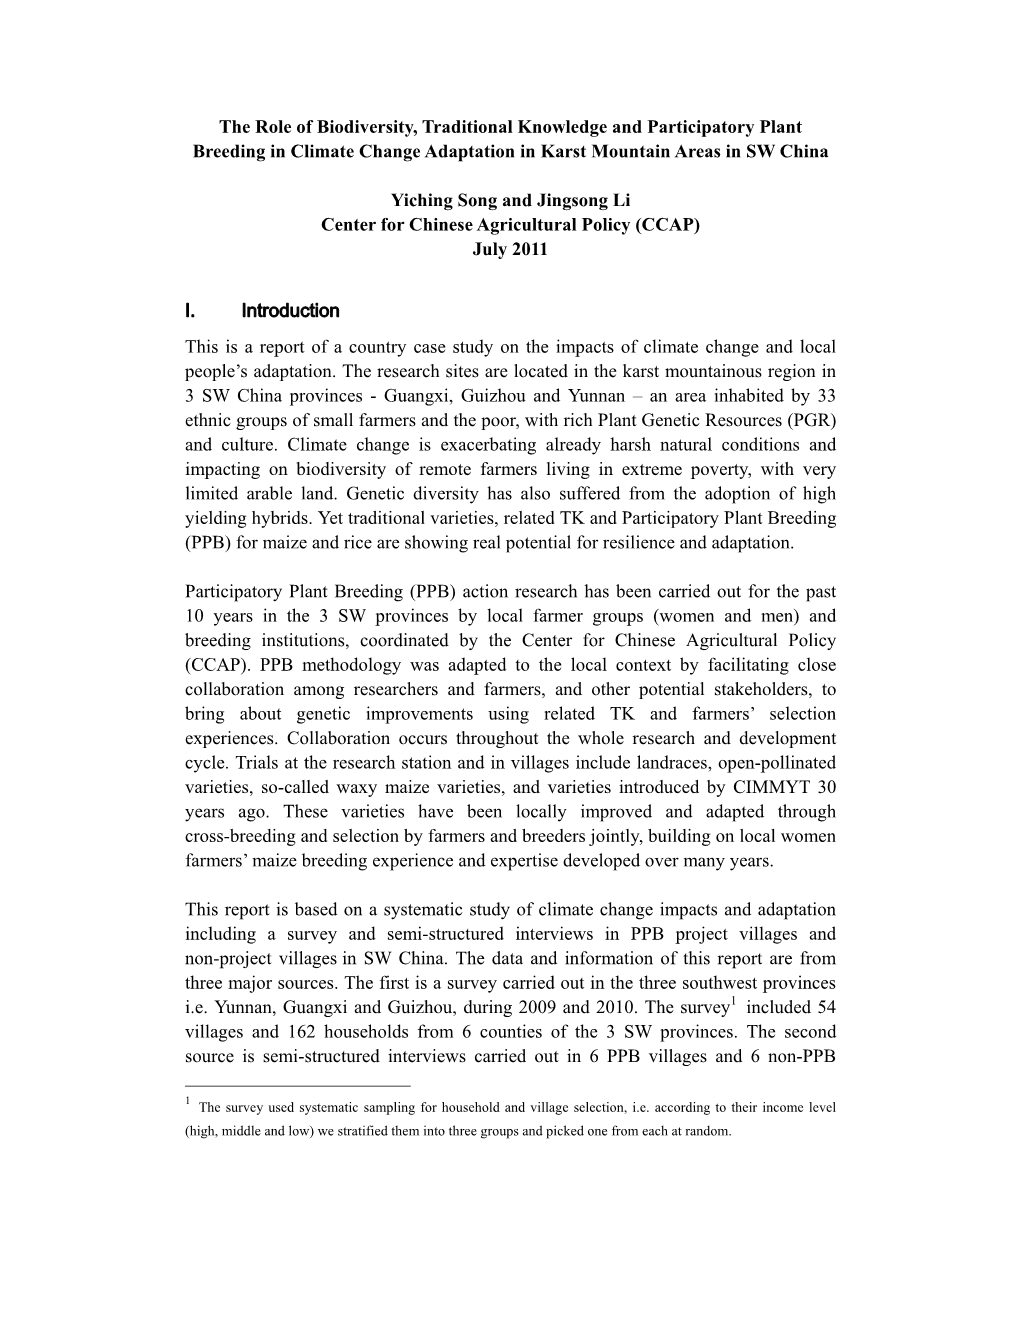 The Role of Biodiversity, Traditional Knowledge and Participatory Plant Breeding in Climate Change Adaptation in Karst Mountain Areas in SW China